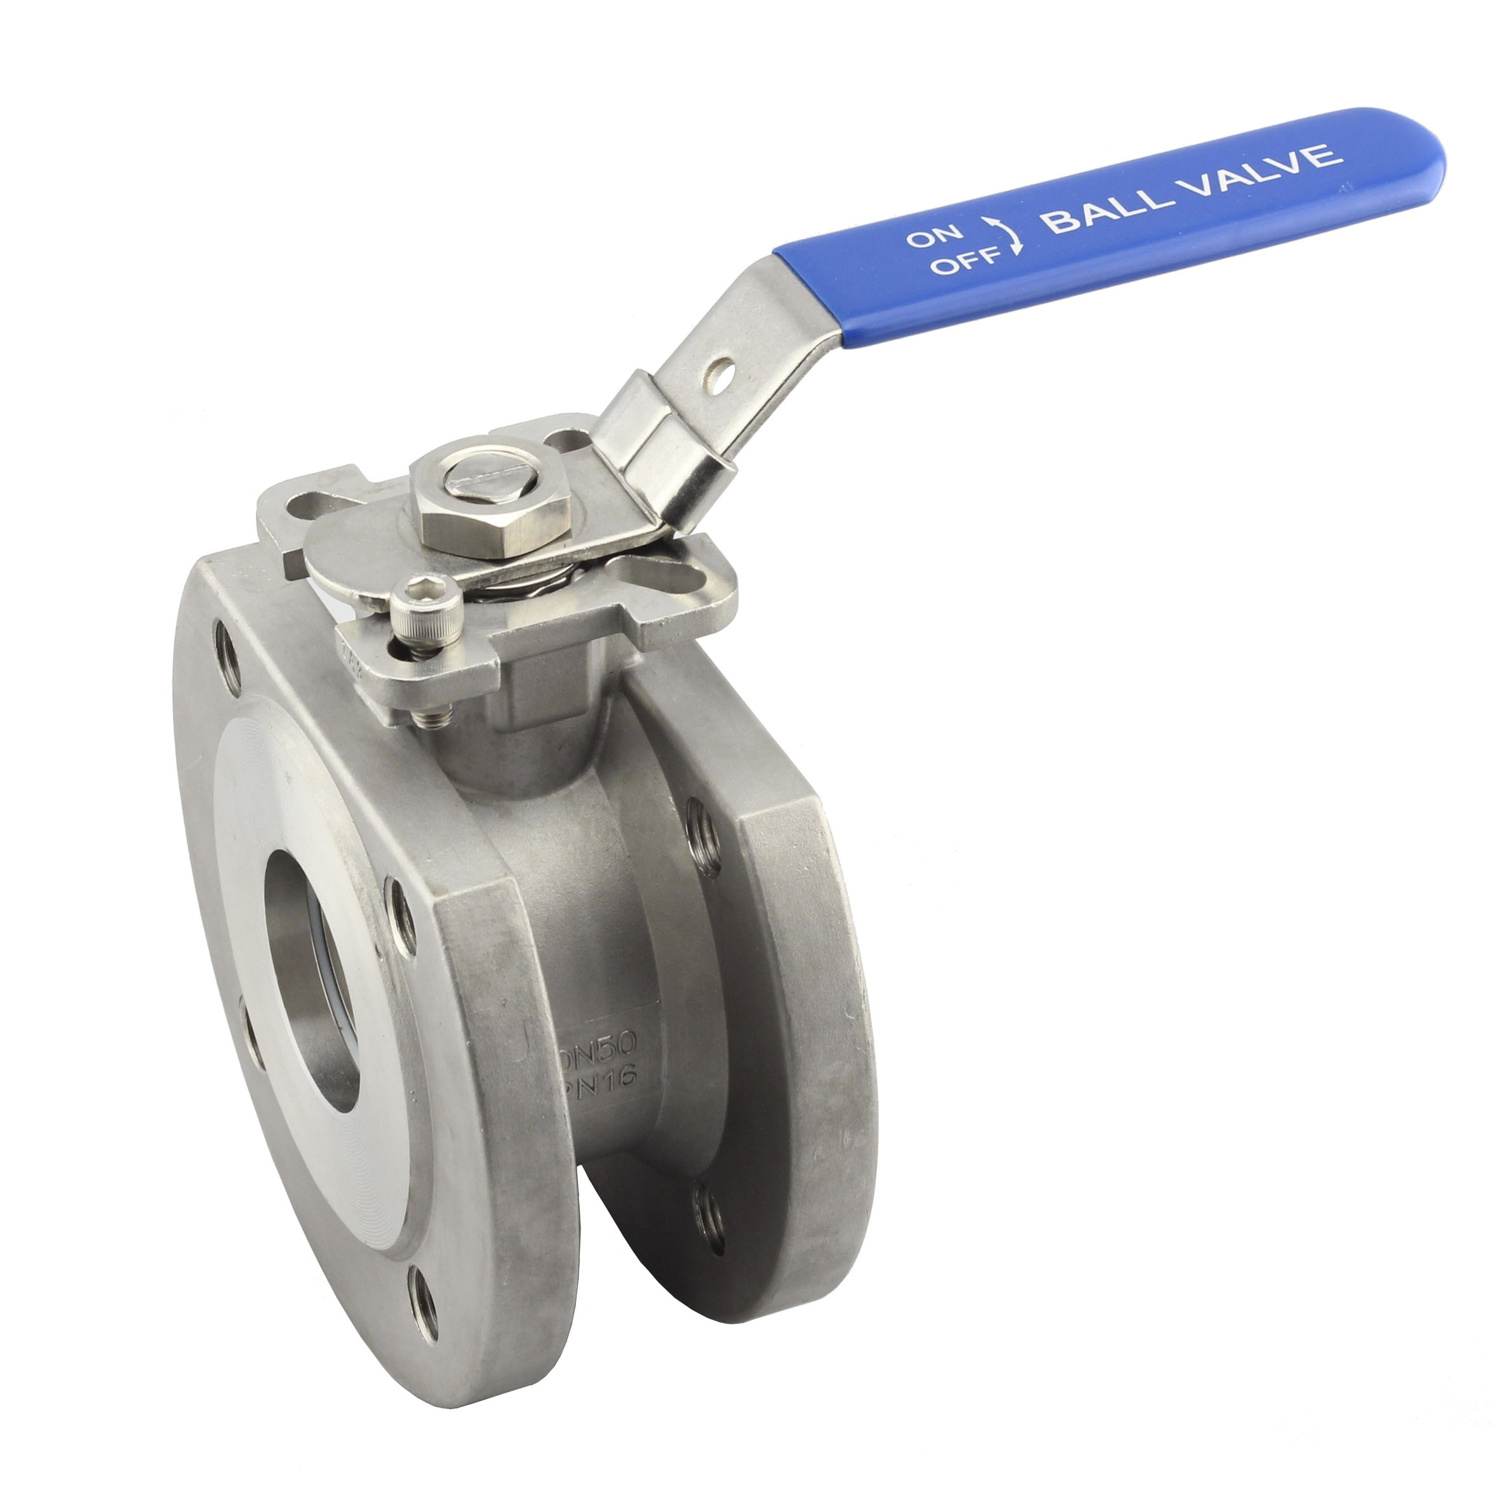 2PC Flanged Ball Valve Full Bore with Mounting Pad